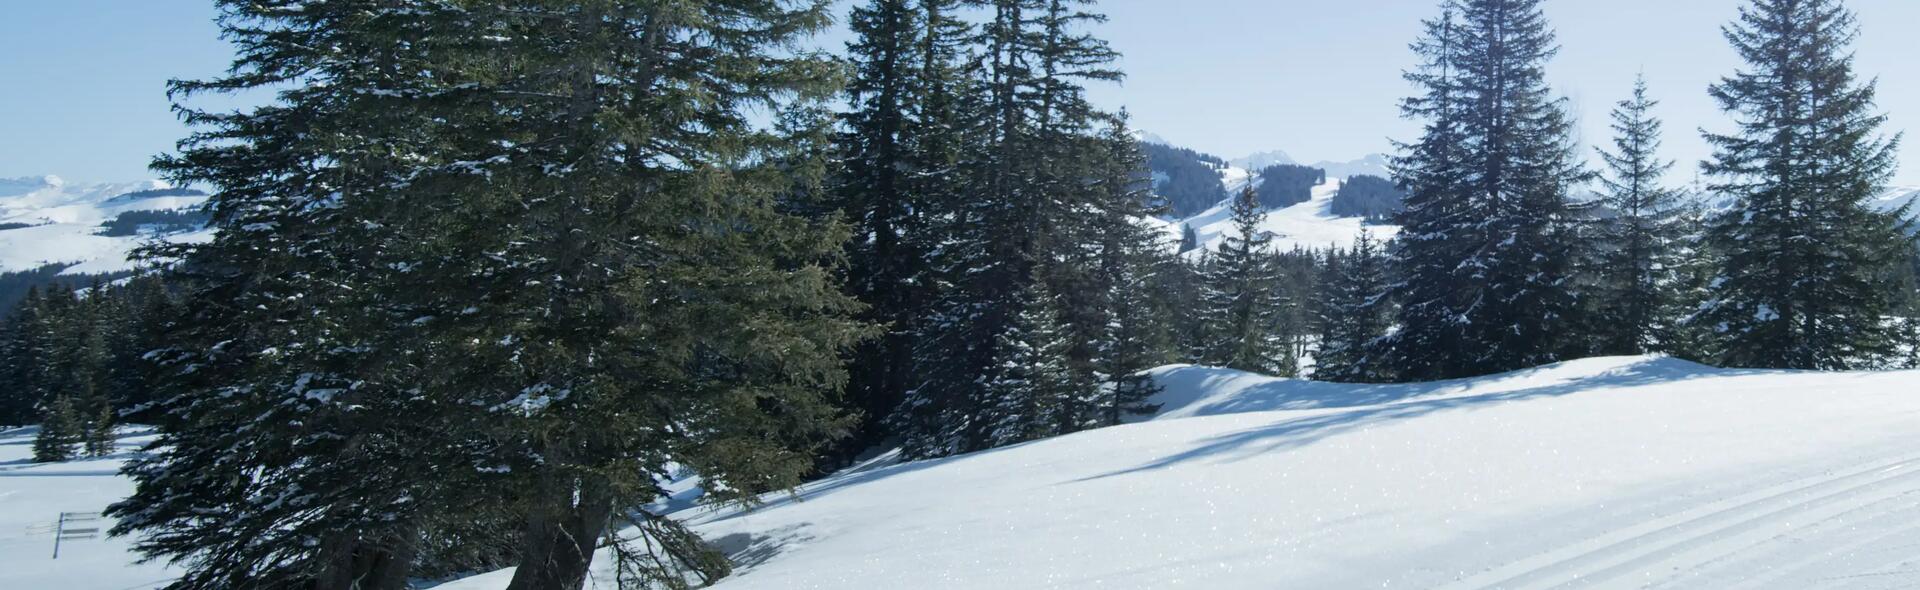 Our 5 favourite cross-country ski resorts in Savoie and Haute-Savoie!